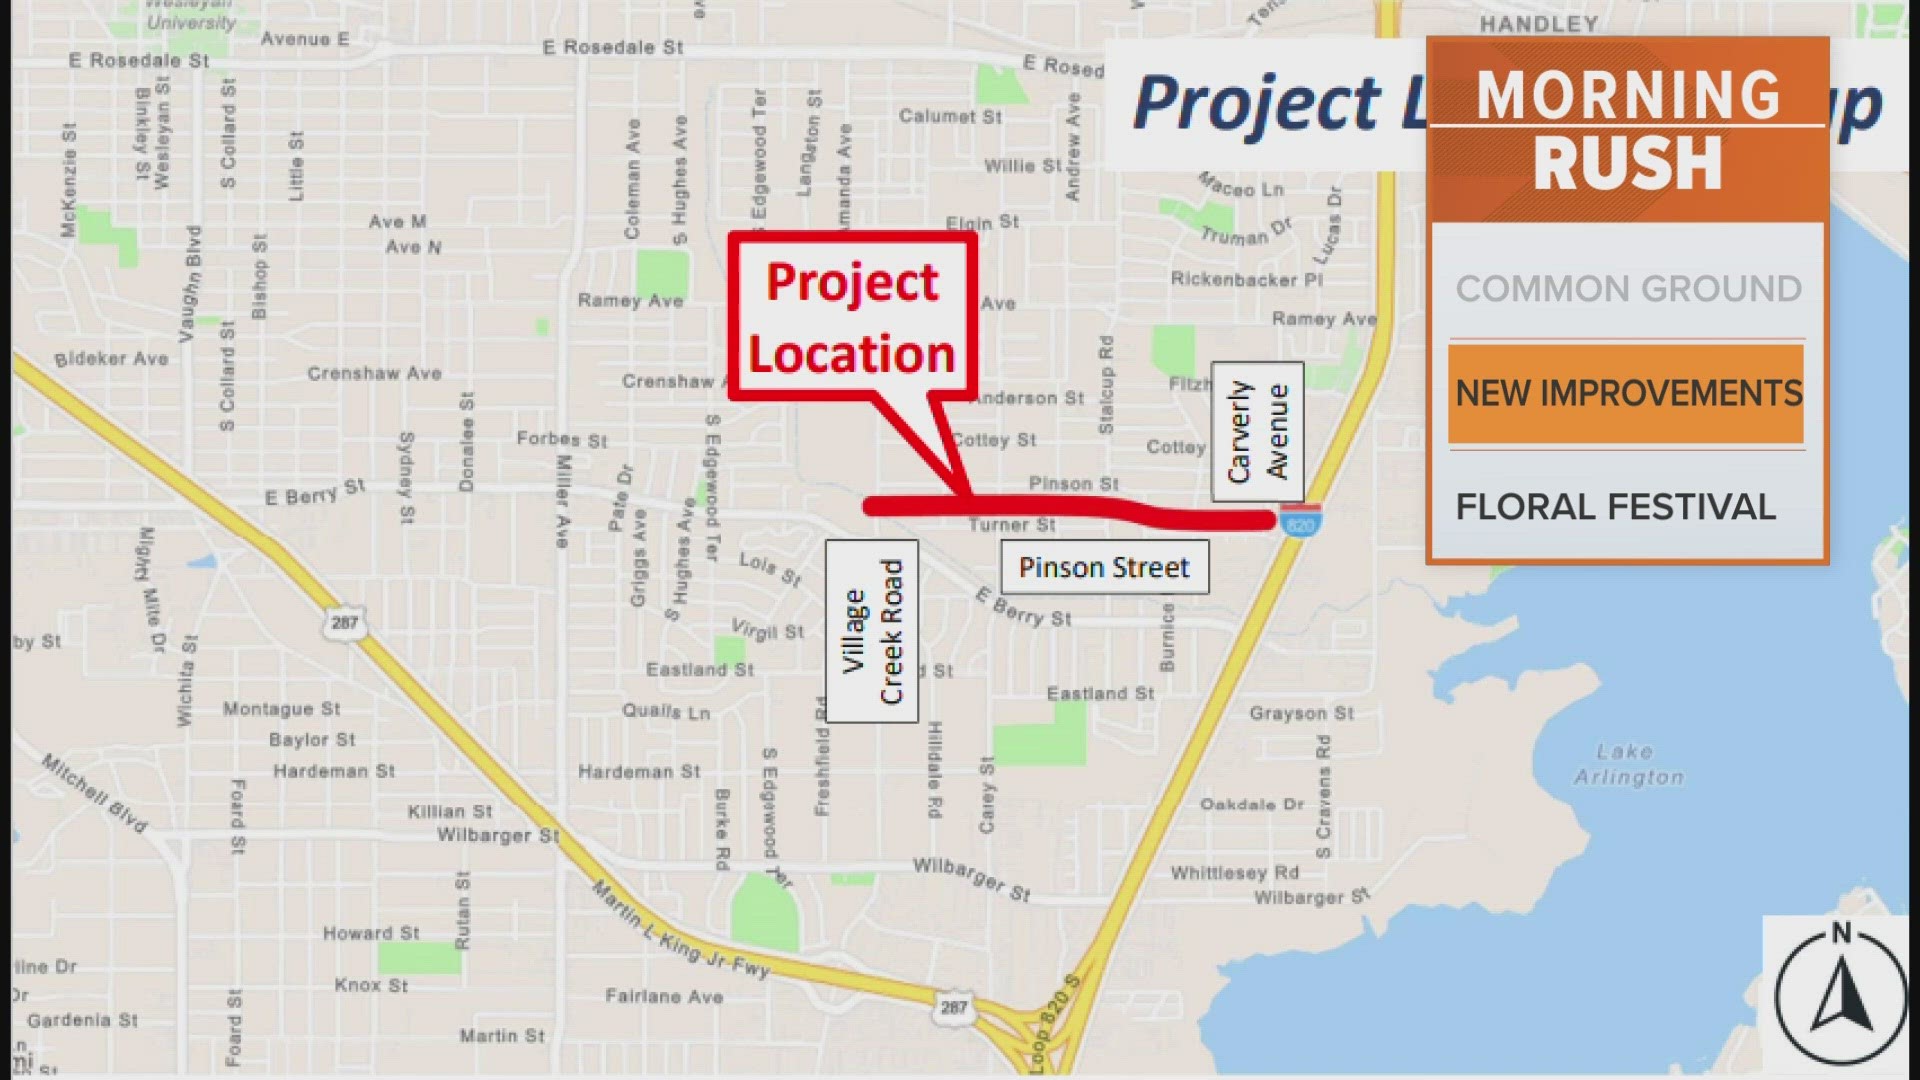 The Pinson Street Improvements Project is set to begin in 2015.